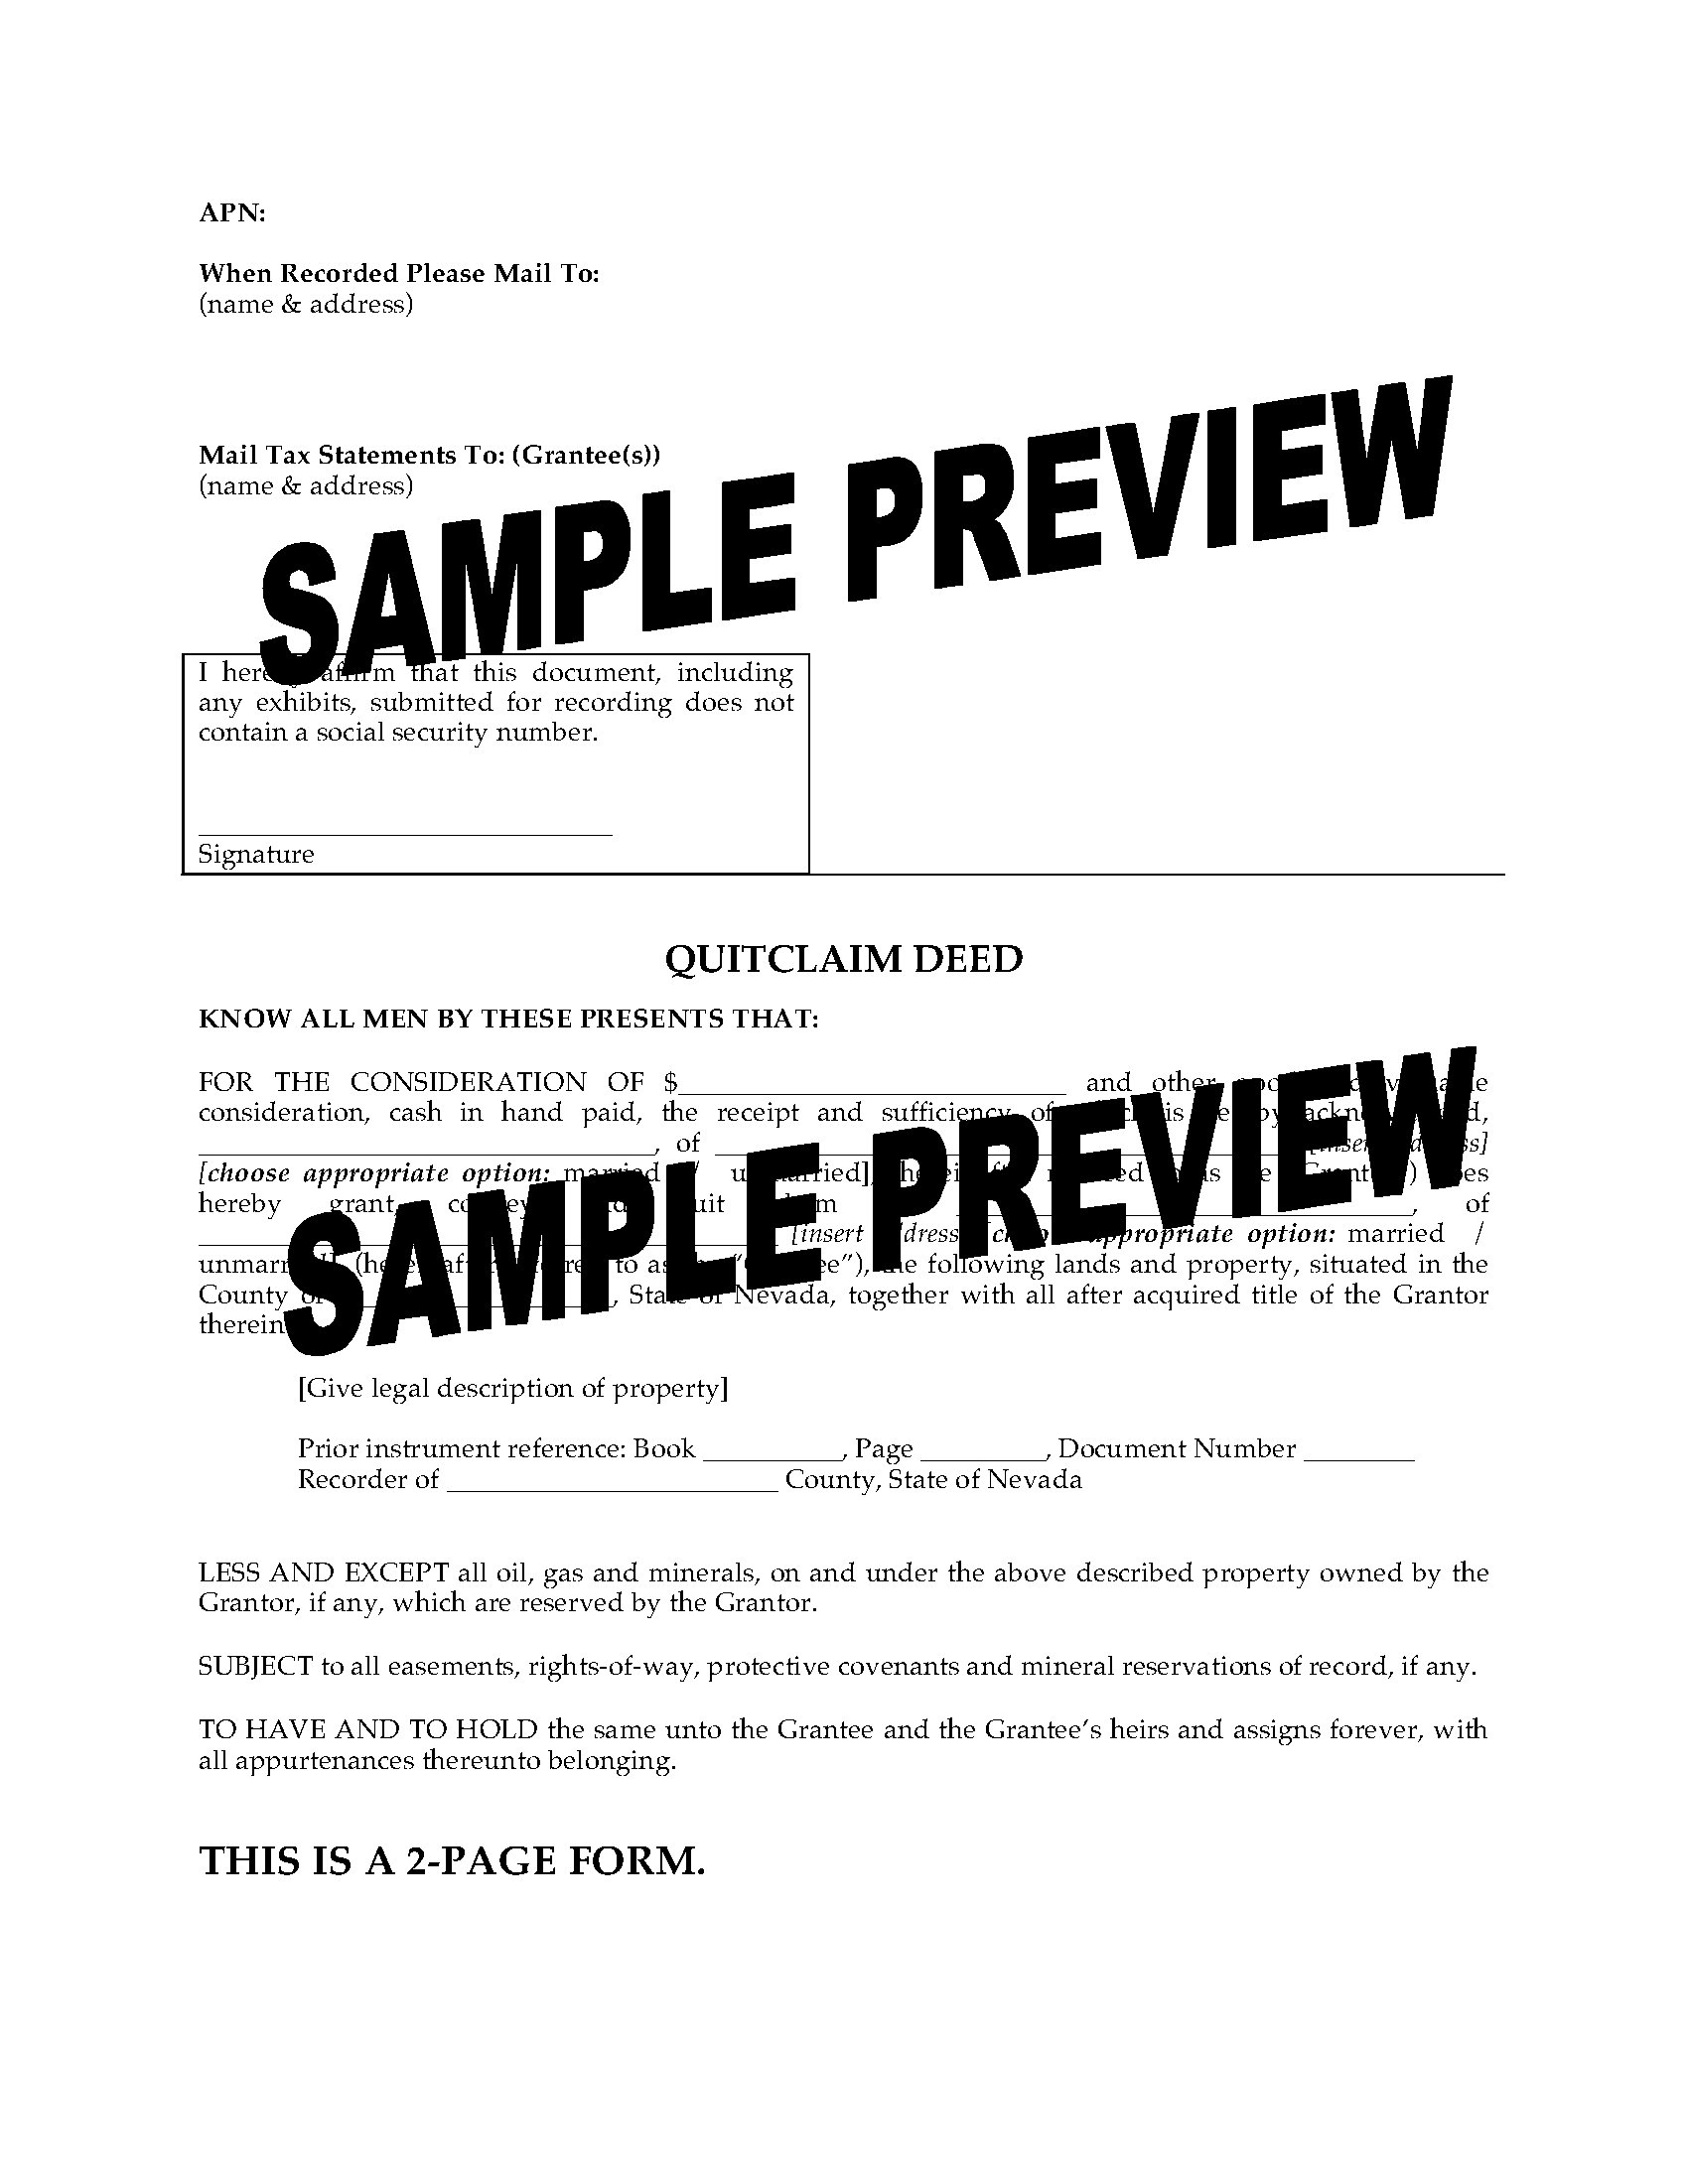 nevada-quitclaim-deed-legal-forms-and-business-templates-megadox